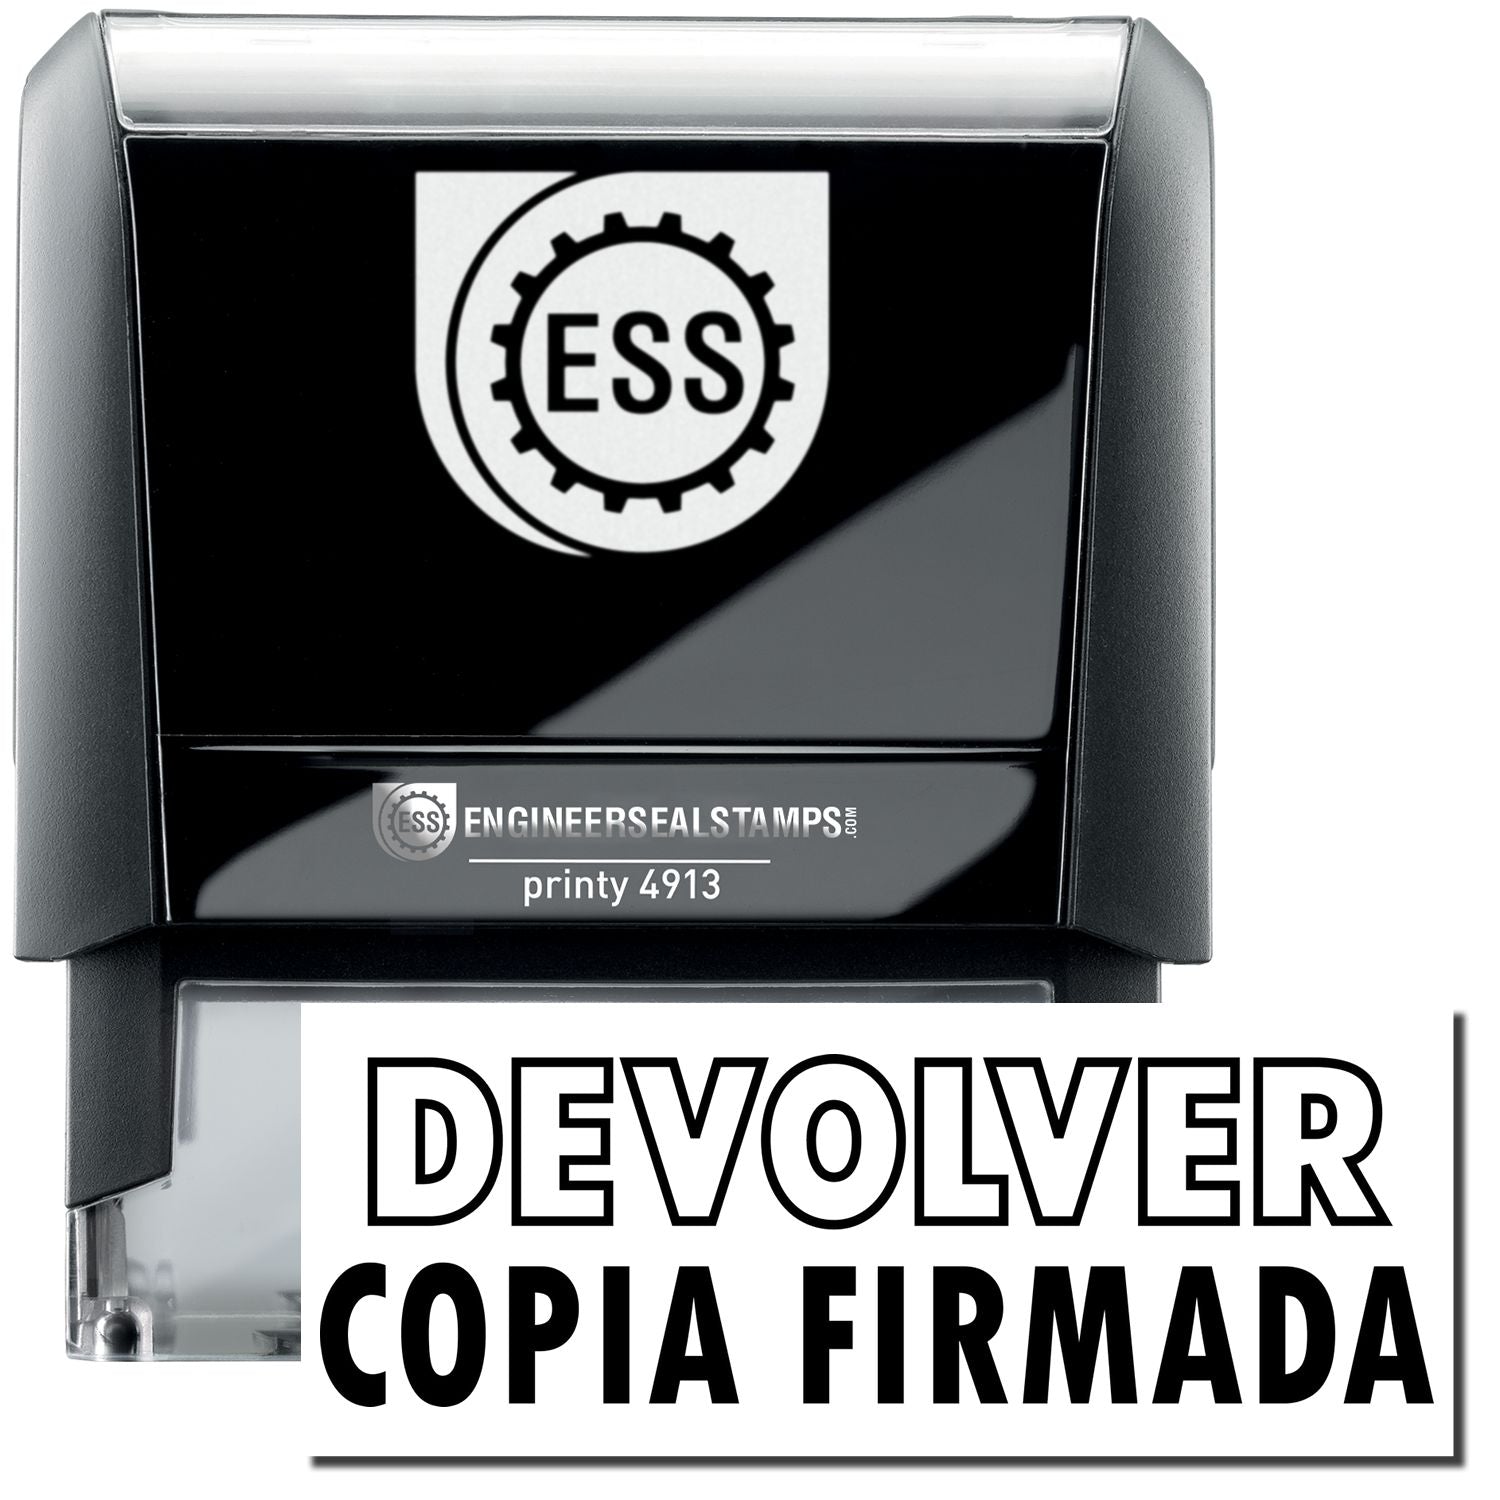 A self-inking stamp with a stamped image showing how the text "DEVOLVER COPIA FIRMADA" in a large font ("DEVOLVER" in outline style) is displayed by it after stamping.